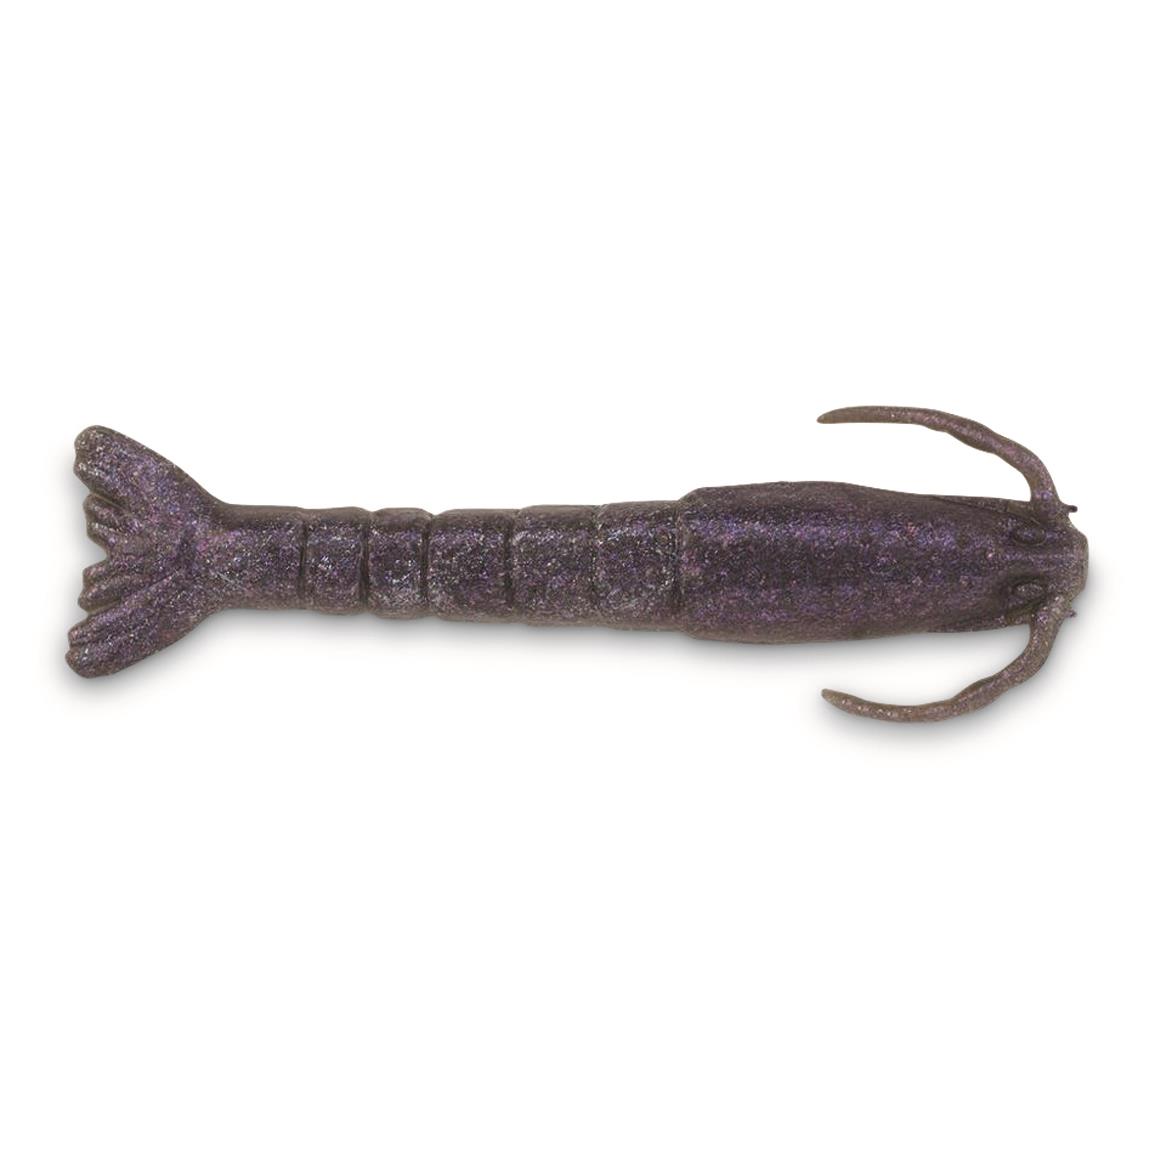 Z-Man 2.5 TRD CrawZ, 6 Pack - 722642, Soft Baits at Sportsman's Guide